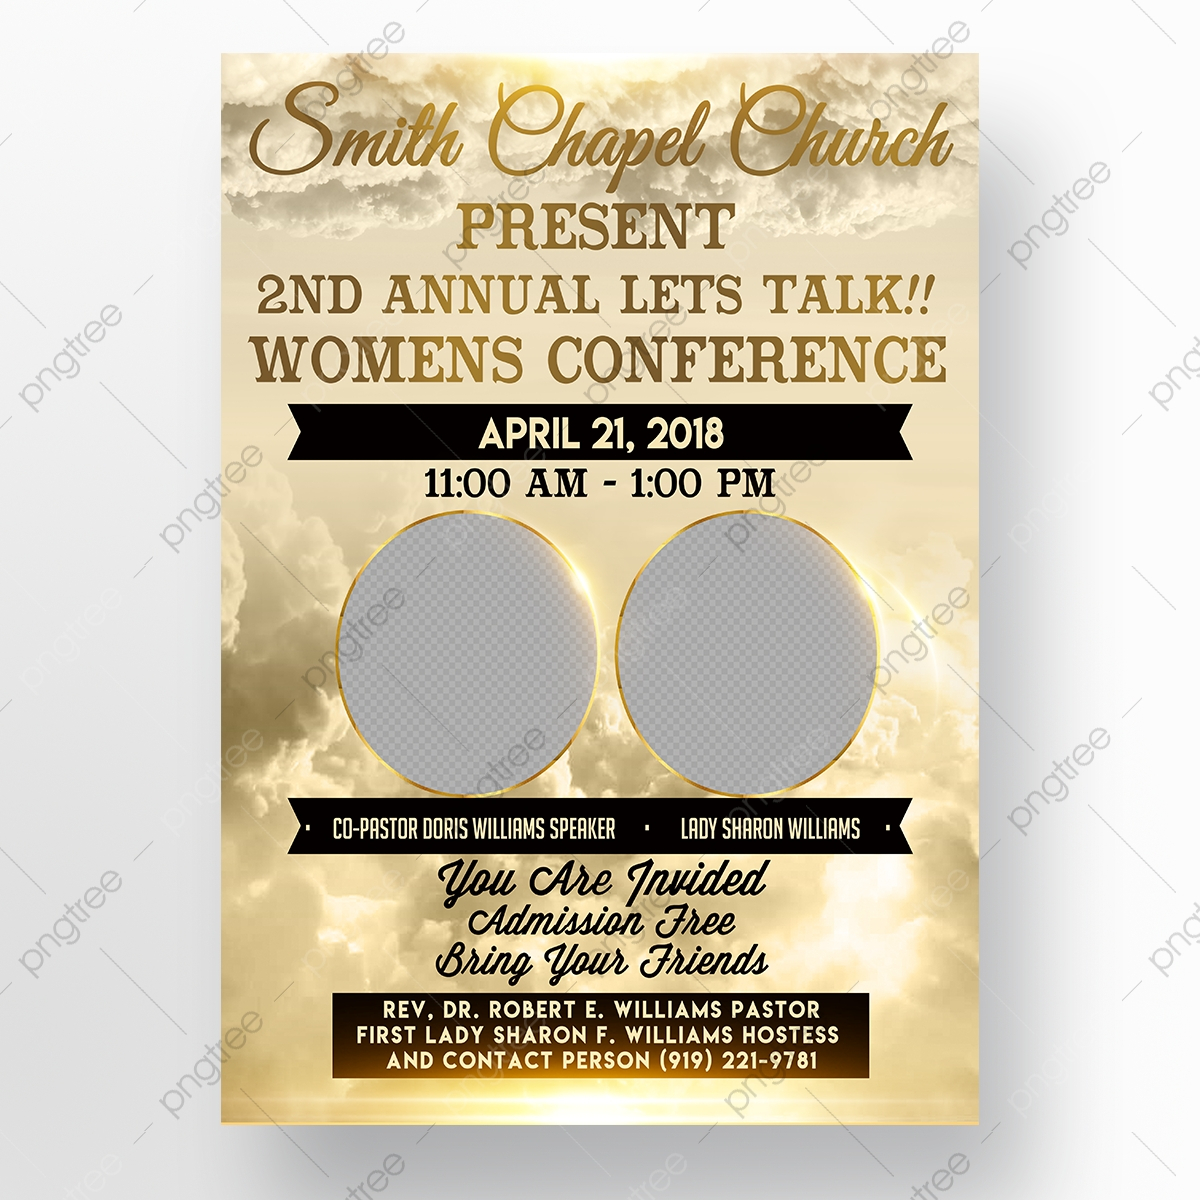 Church Conference Flyer Template Download on Pngtree With Regard To Church Conference Flyer Template With Regard To Church Conference Flyer Template